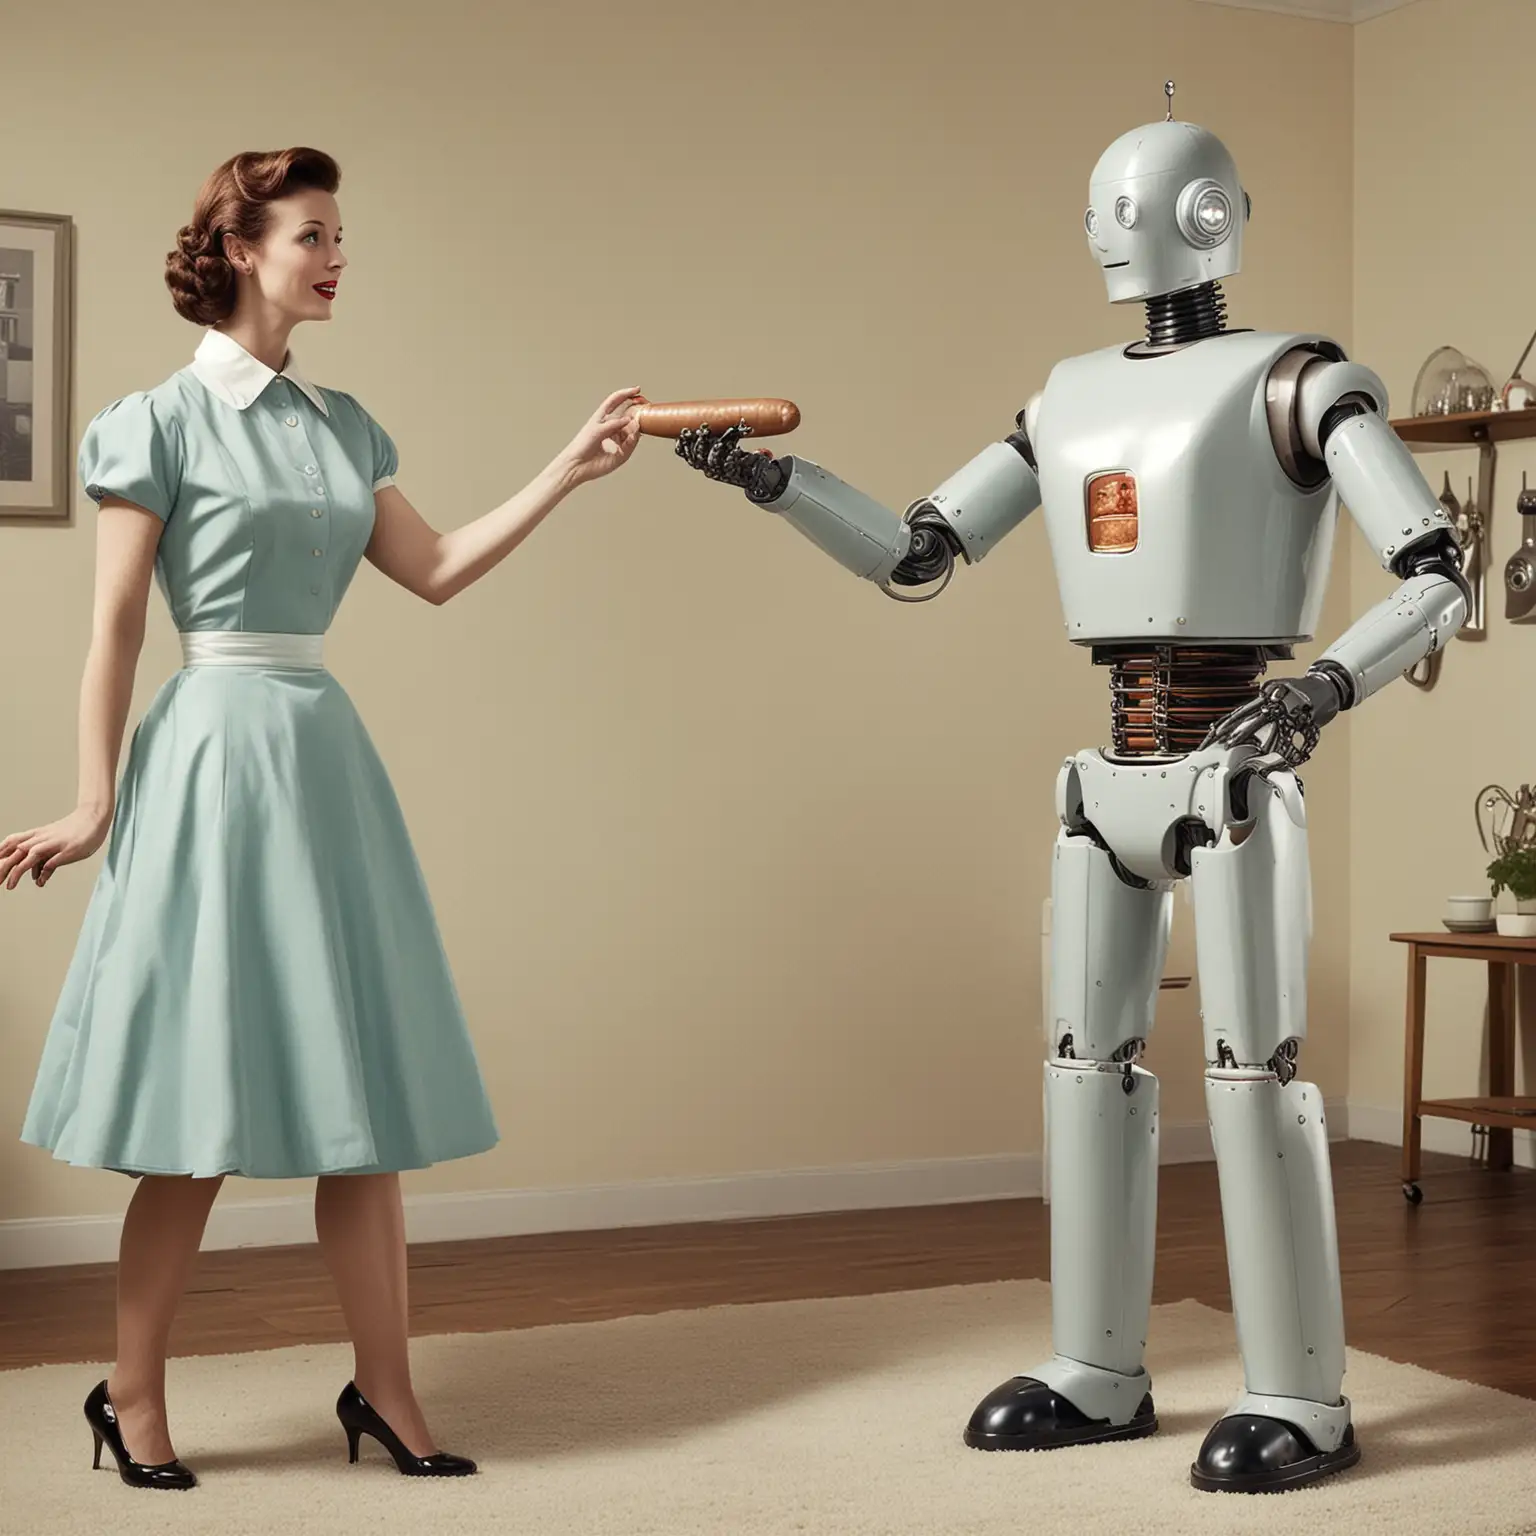 Robot Throws Sausage at 1950s Housewife in Retro Kitchen